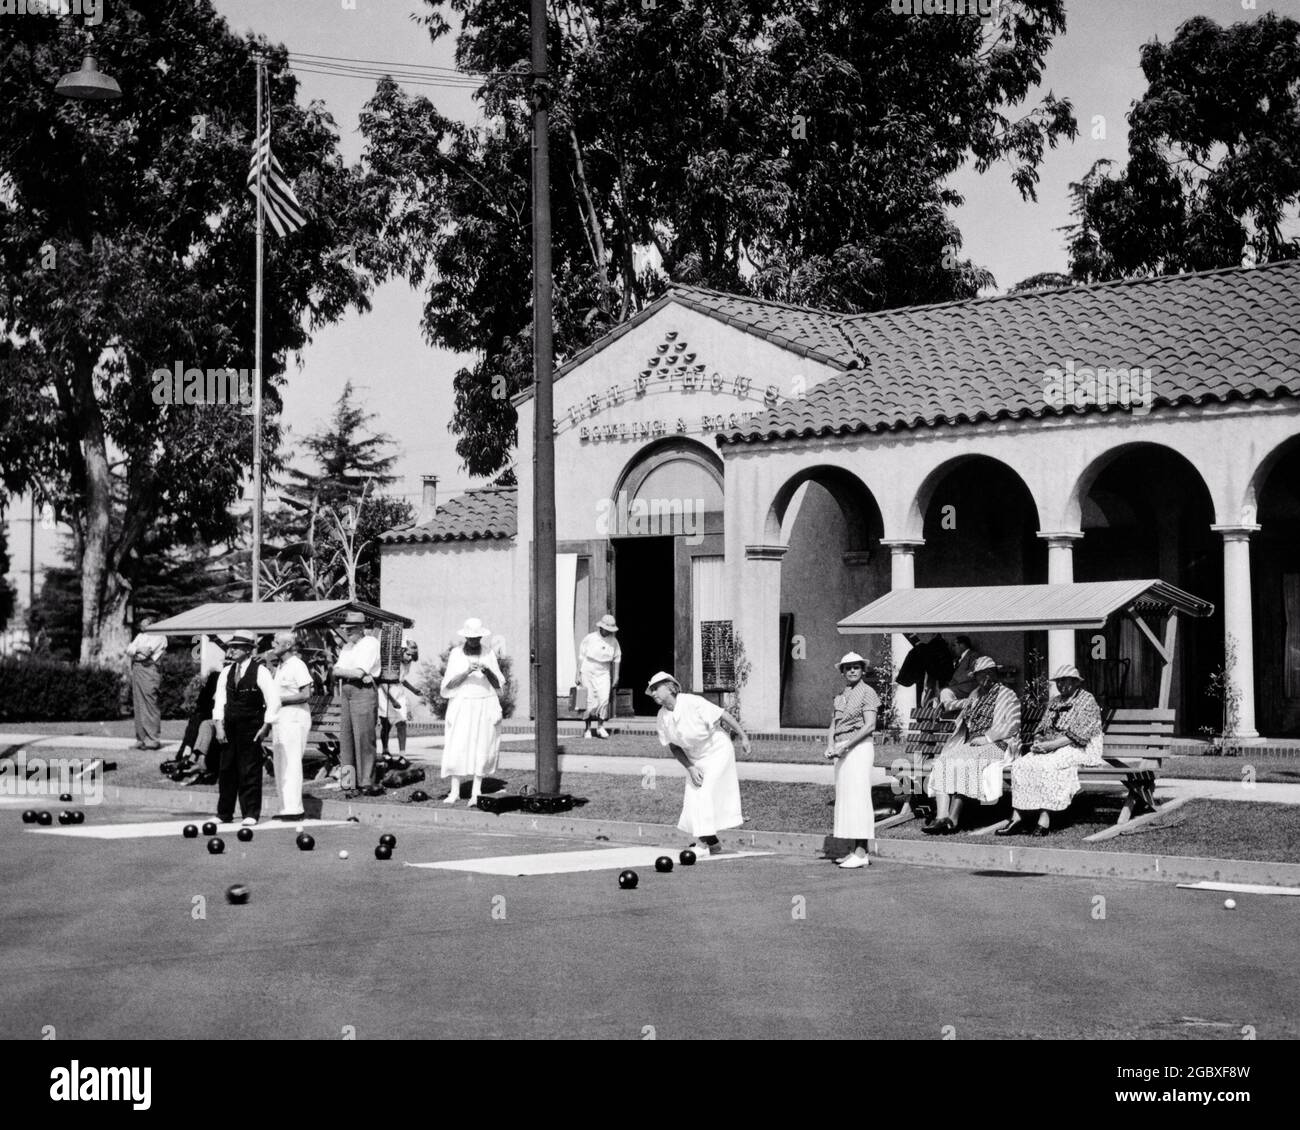 1930s GROUP OF ELEGANTLY SPORTS DRESSED MEN AND WOMEN PARTICIPATING IN AND ENJOYING BOWLS OR LAWN BOWLS AT COUNTRY CLUB - asp ap10 801 ASP001 HARS JOY LIFESTYLE ELDER FEMALES HEALTHINESS COPY SPACE FRIENDSHIP FULL-LENGTH LADIES PHYSICAL FITNESS PERSONS BOWLS MALES ATHLETIC SENIOR MAN SENIOR ADULT B&W SENIOR WOMAN OLD AGE OLDSTERS OLDSTER LEISURE STRATEGY AND ENJOYING EXTERIOR RECREATION COUNTRY CLUB AT IN OF ON UPSCALE ELDERS AFFLUENT ELEGANTLY STARS AND STRIPES STYLISH UNUSUAL OLD GLORY OR BOWLING GREEN KITTY PLAYED RED WHITE AND BLUE RELAXATION TOGETHERNESS WELL-TO-DO BLACK AND WHITE Stock Photo